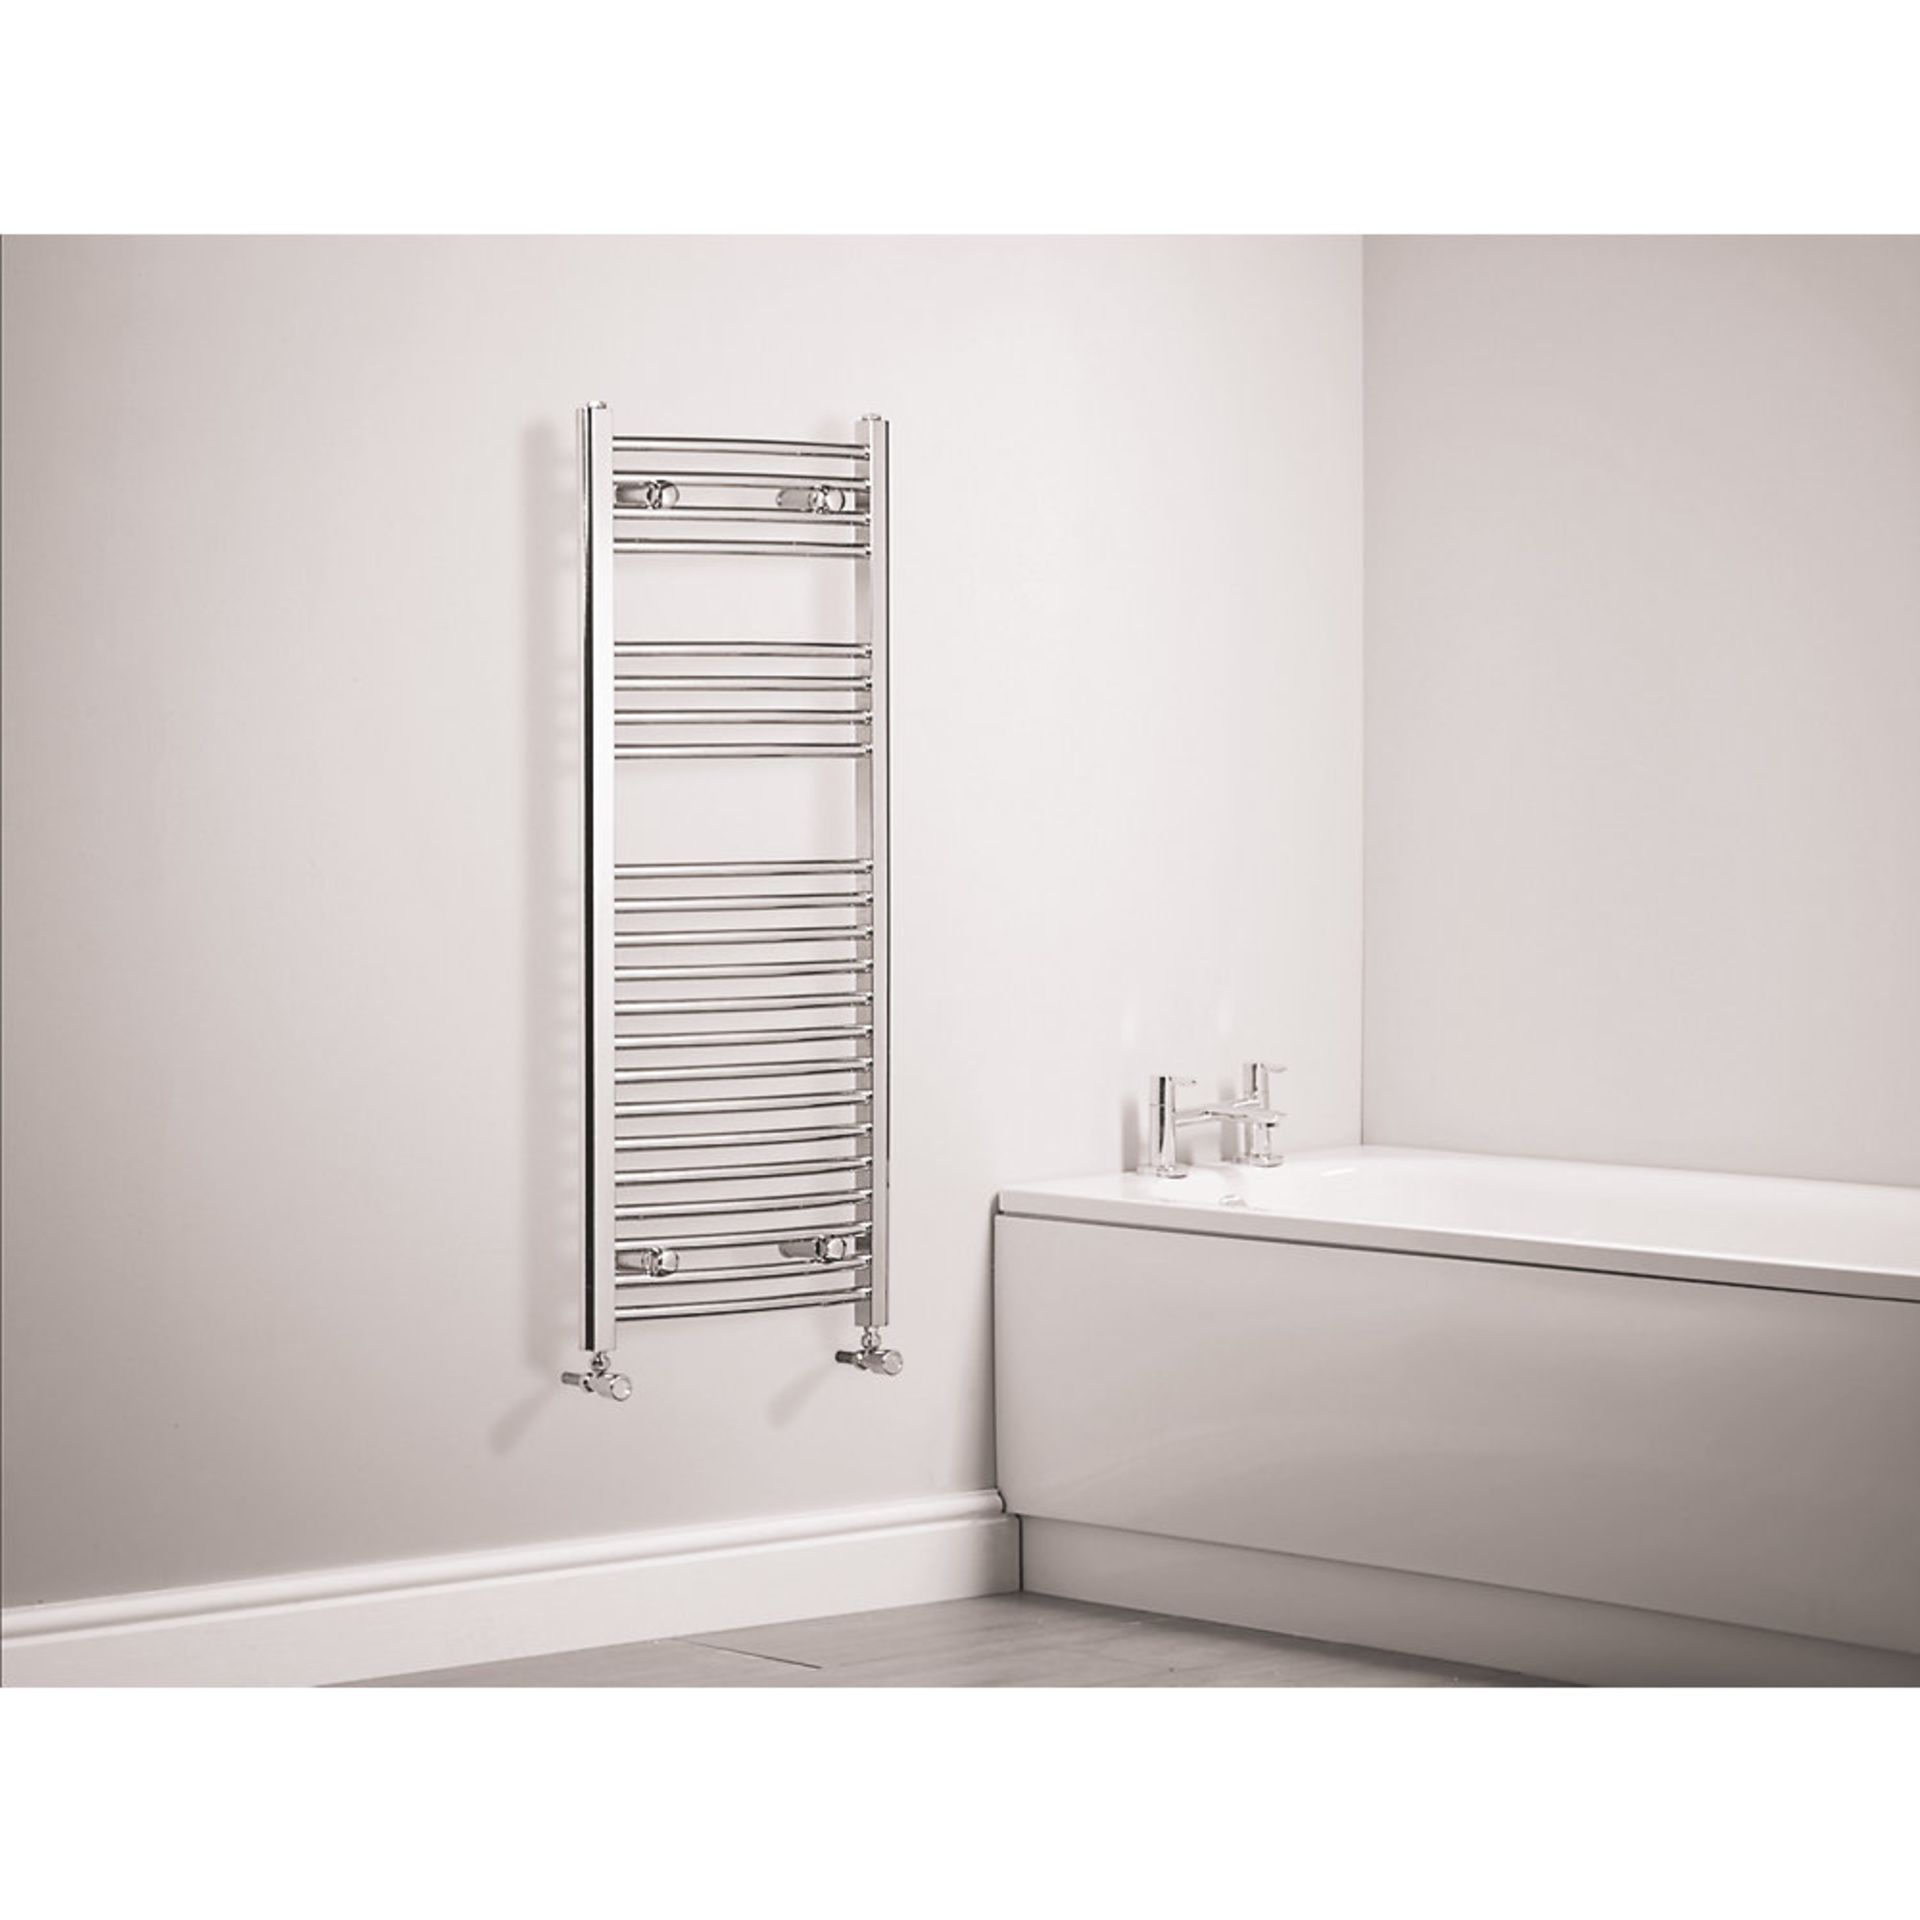 (MC186) 1100 X 450MM CURVED TOWEL RADIATOR CHROME. Curved Chrome-Plated Mild Steel Construction This